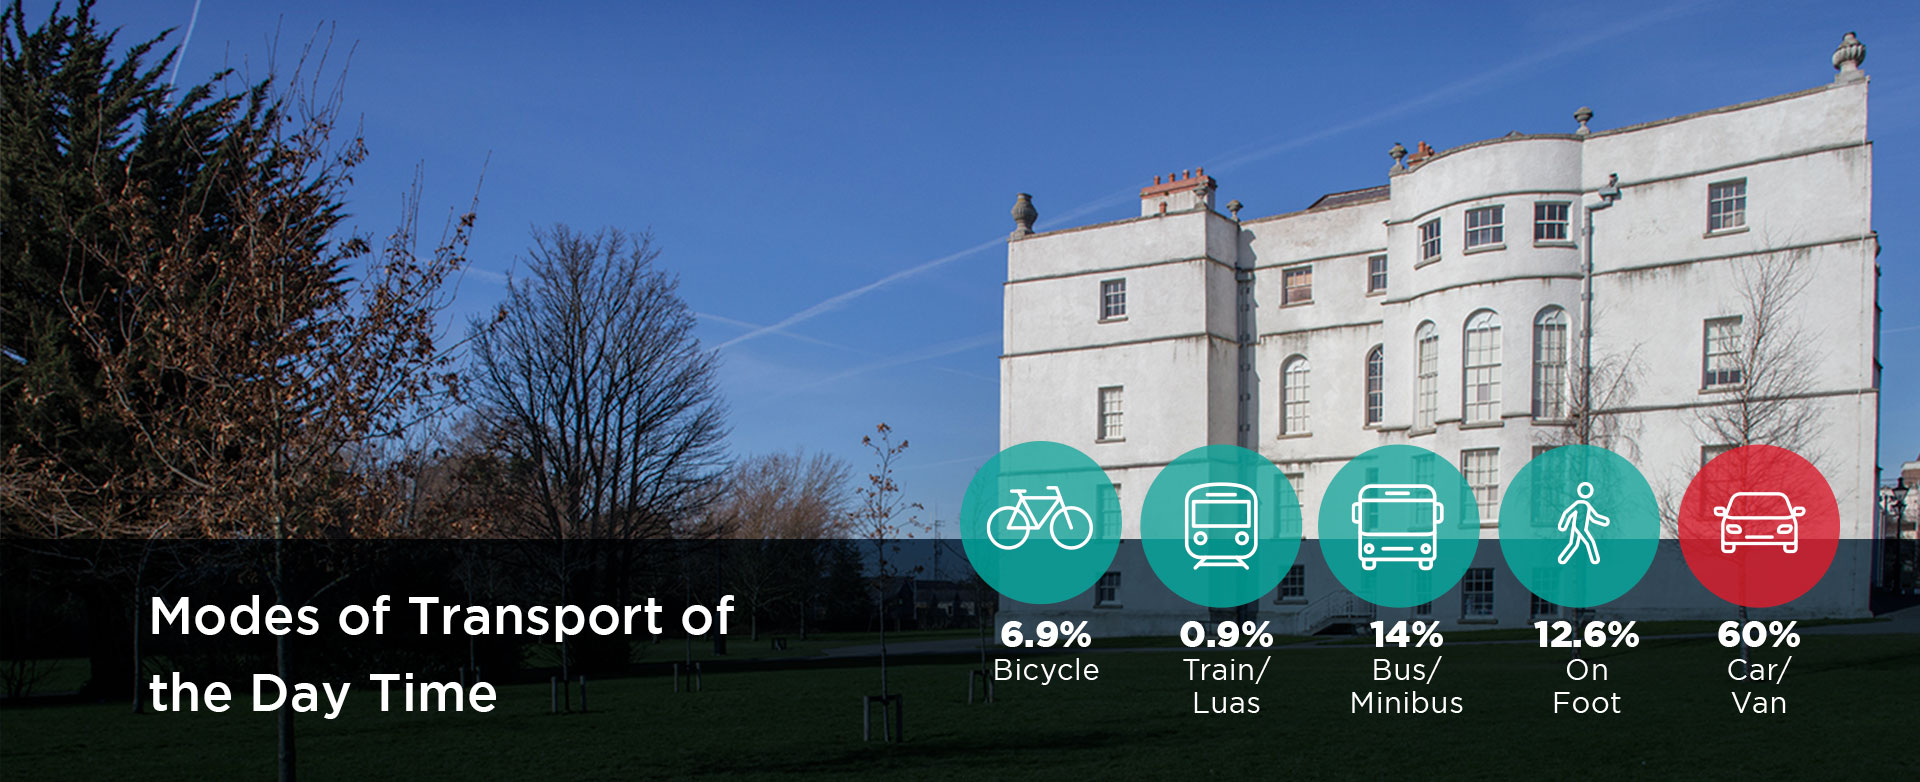 Modes of Transport of the Day Time: 6.9& Bicycle, .9% Train/Luas, 14% Bus/Minibus, 12.6% On foot, 60% Car/Van